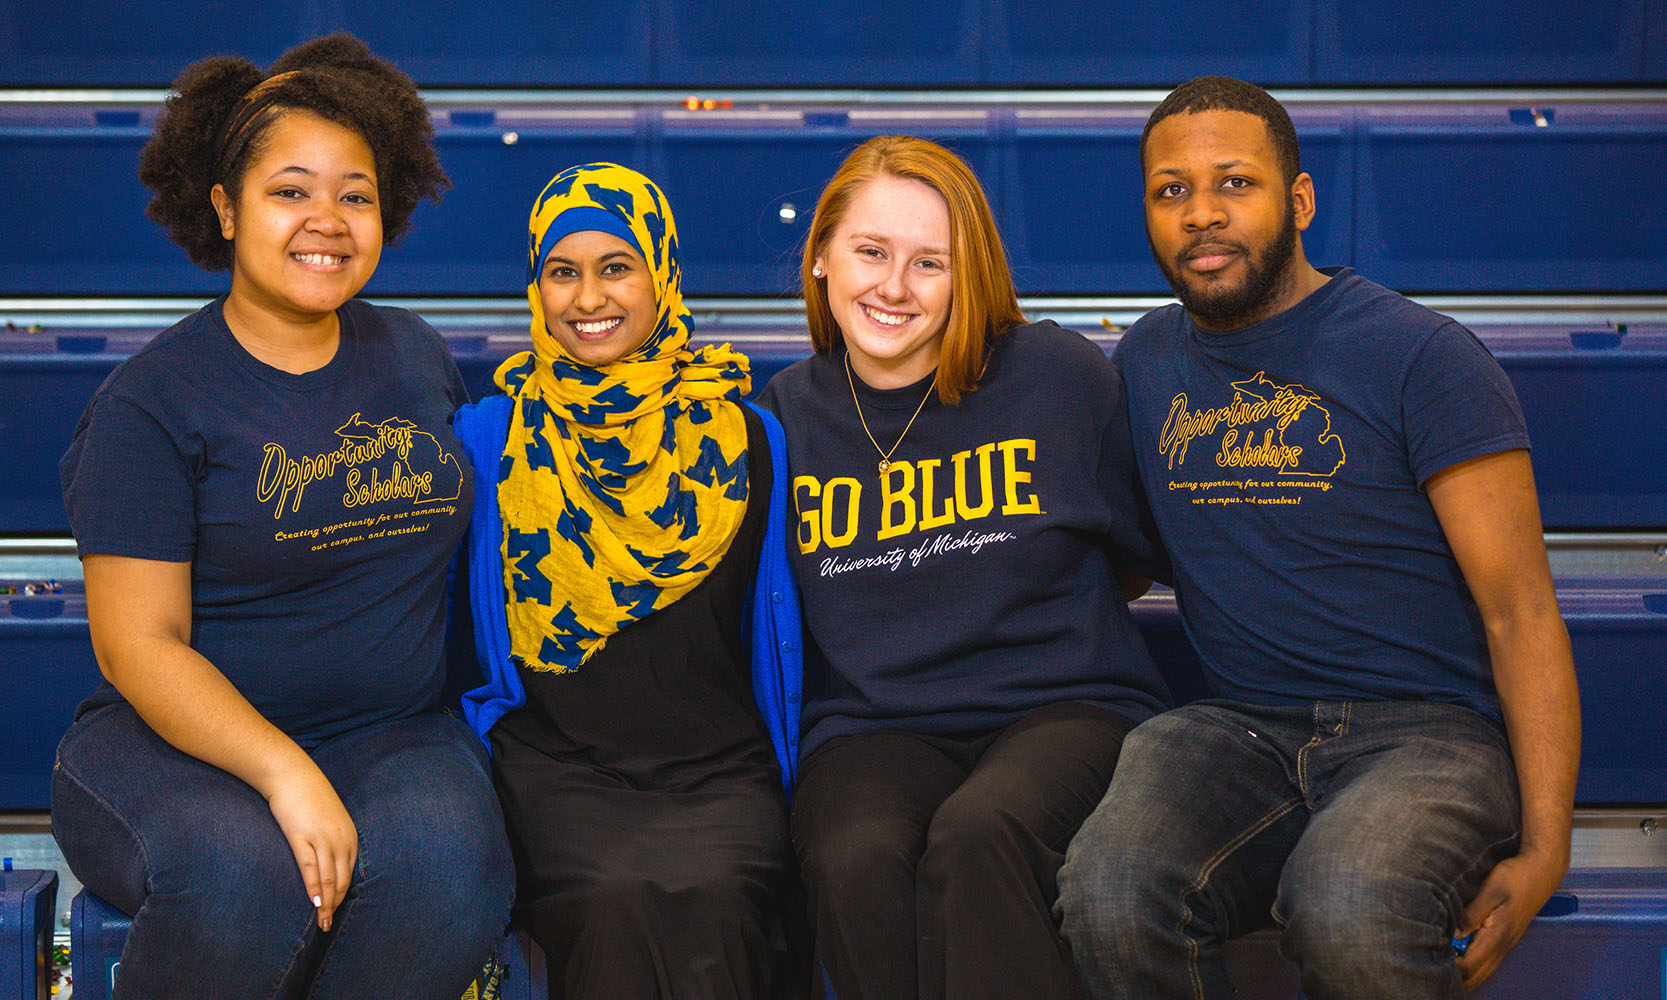 4 students sitting arm in arm with UM-Dearborn attire.